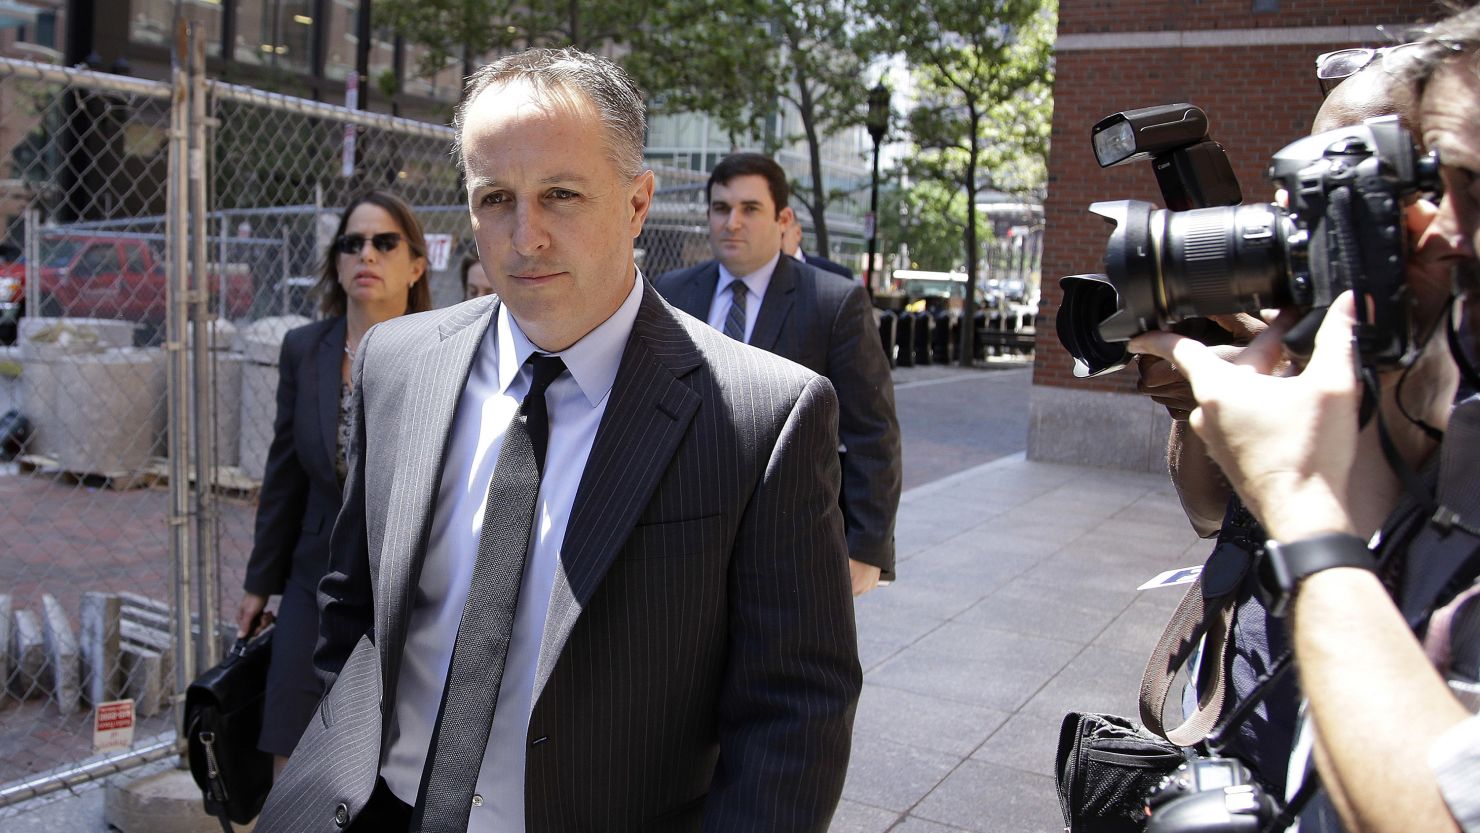 In this June 2017 file photo, Barry Cadden, president of the New England Compounding Center, followed by members of his legal team, arrives at the federal courthouse for his sentencing in Boston.